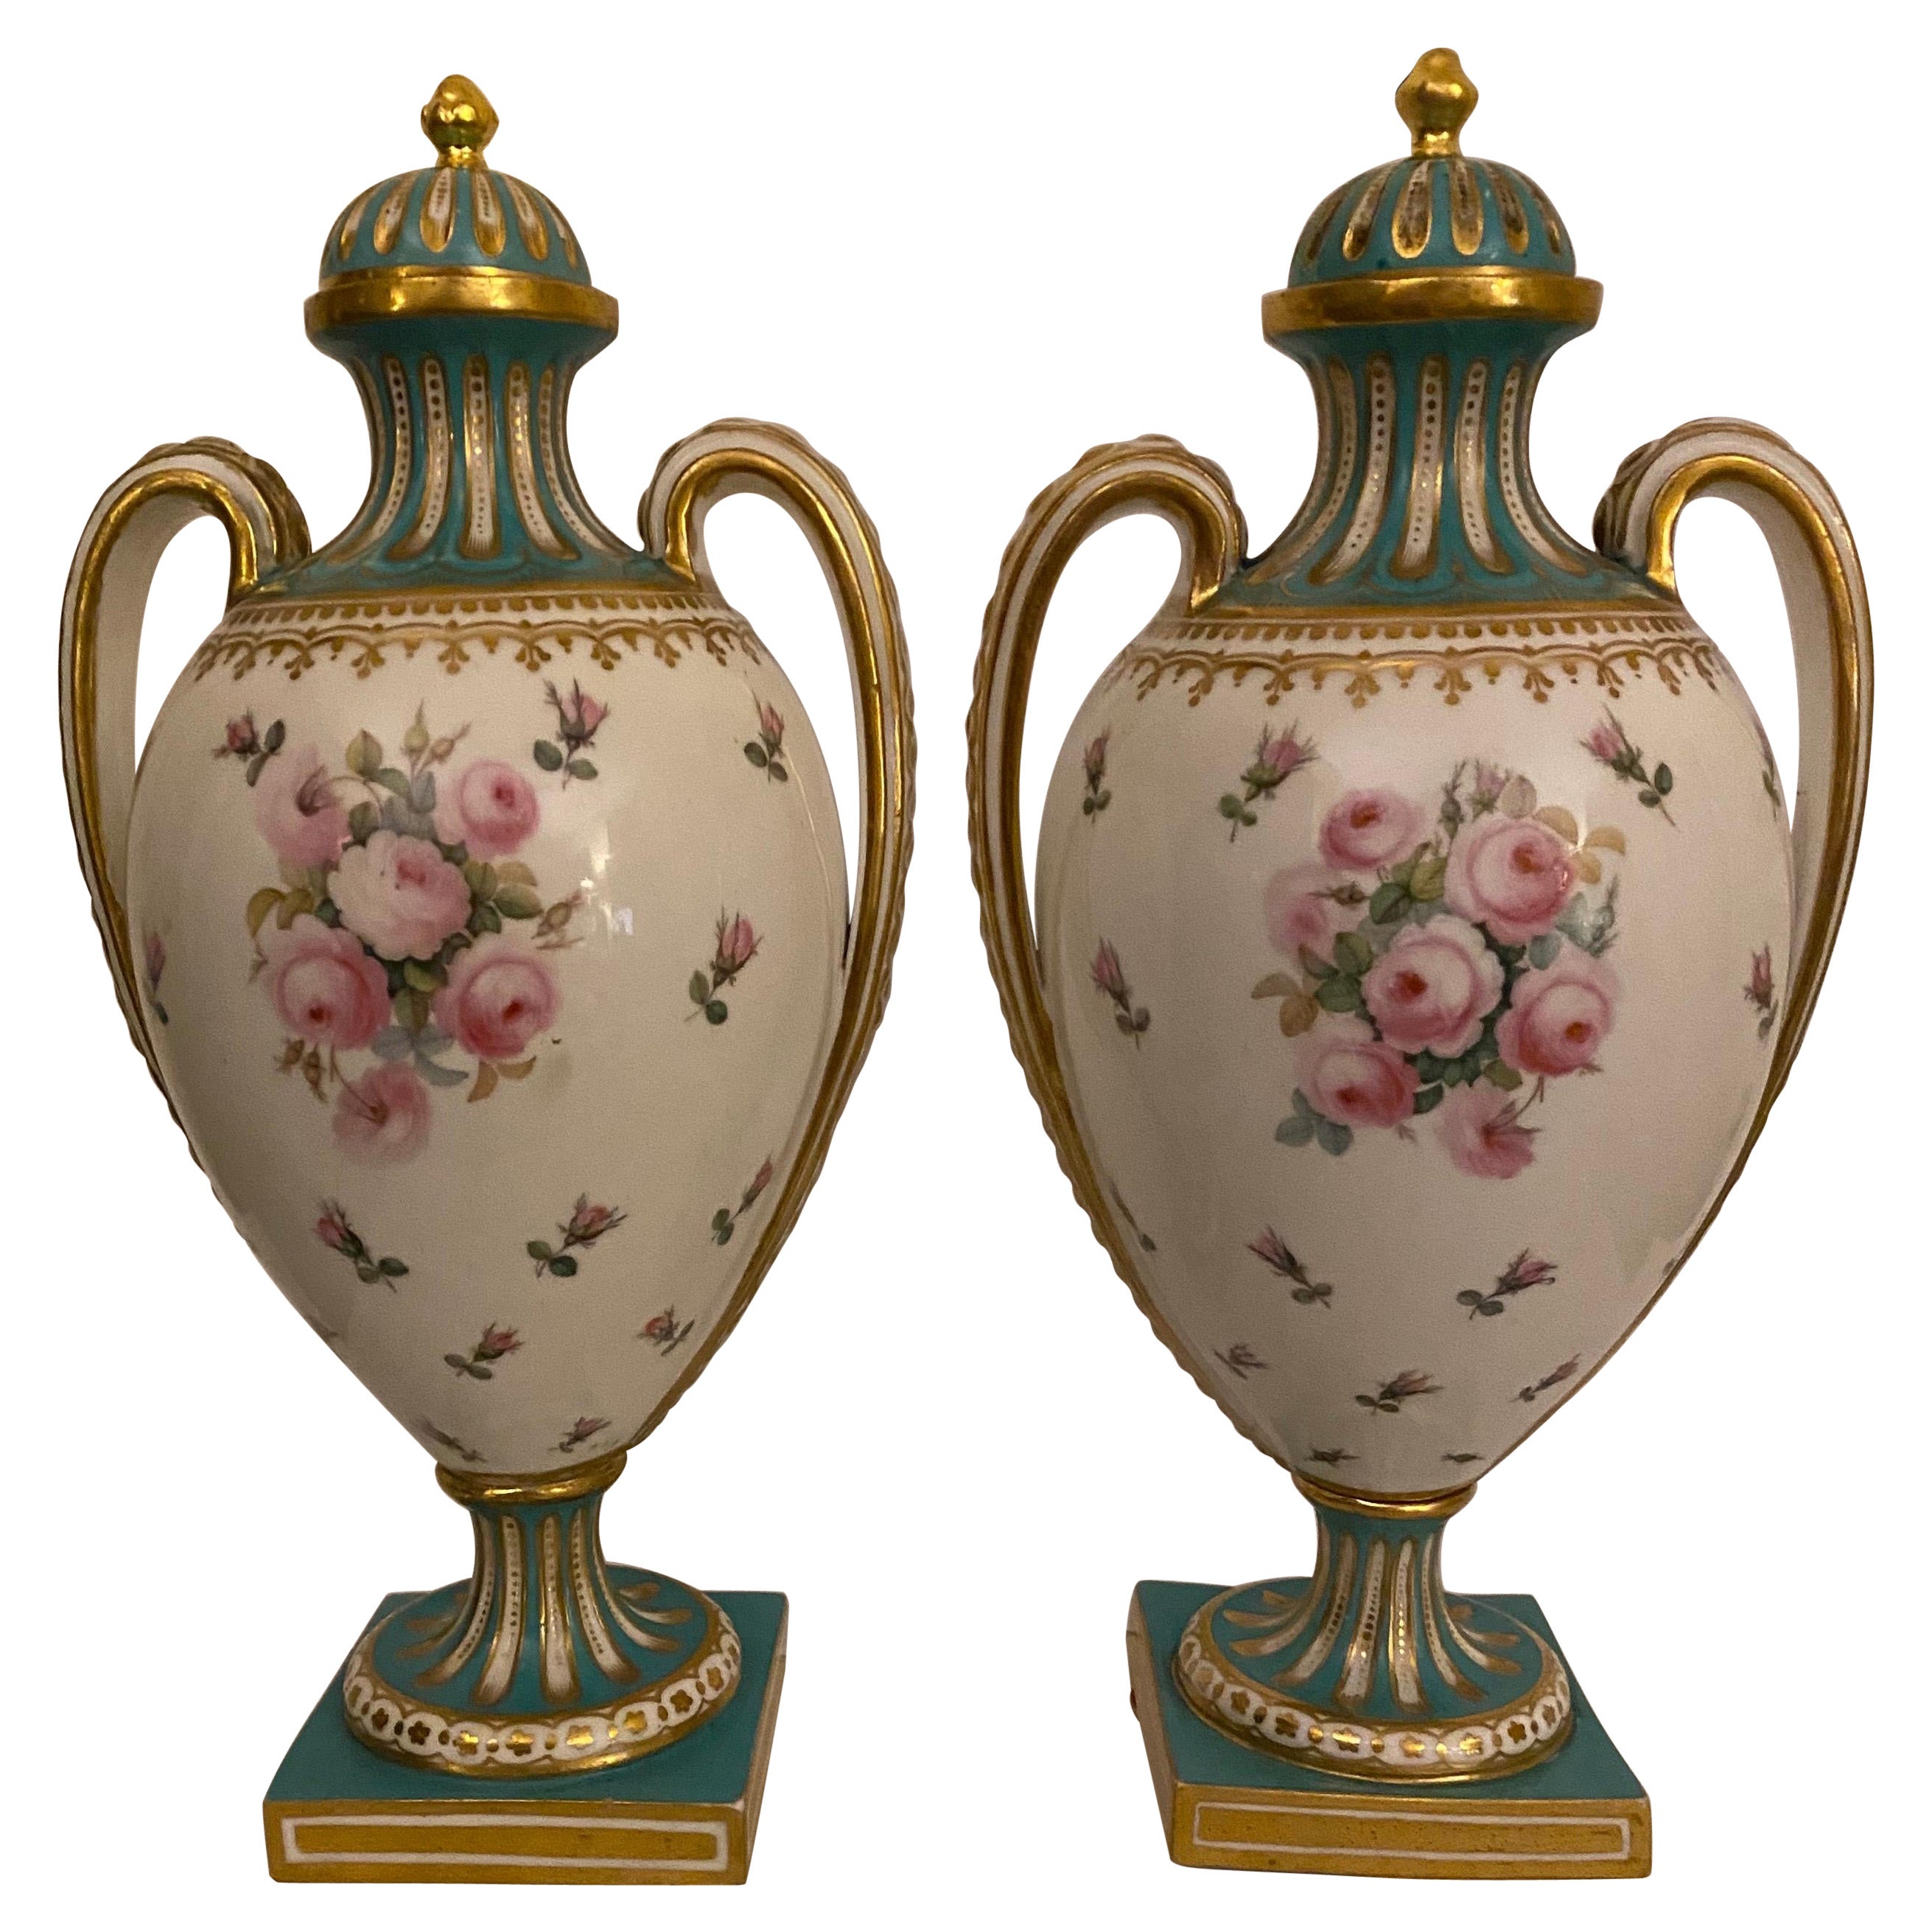 Pair of 19th Century English Porcelain Urns Attributed to Coalport, 1860's